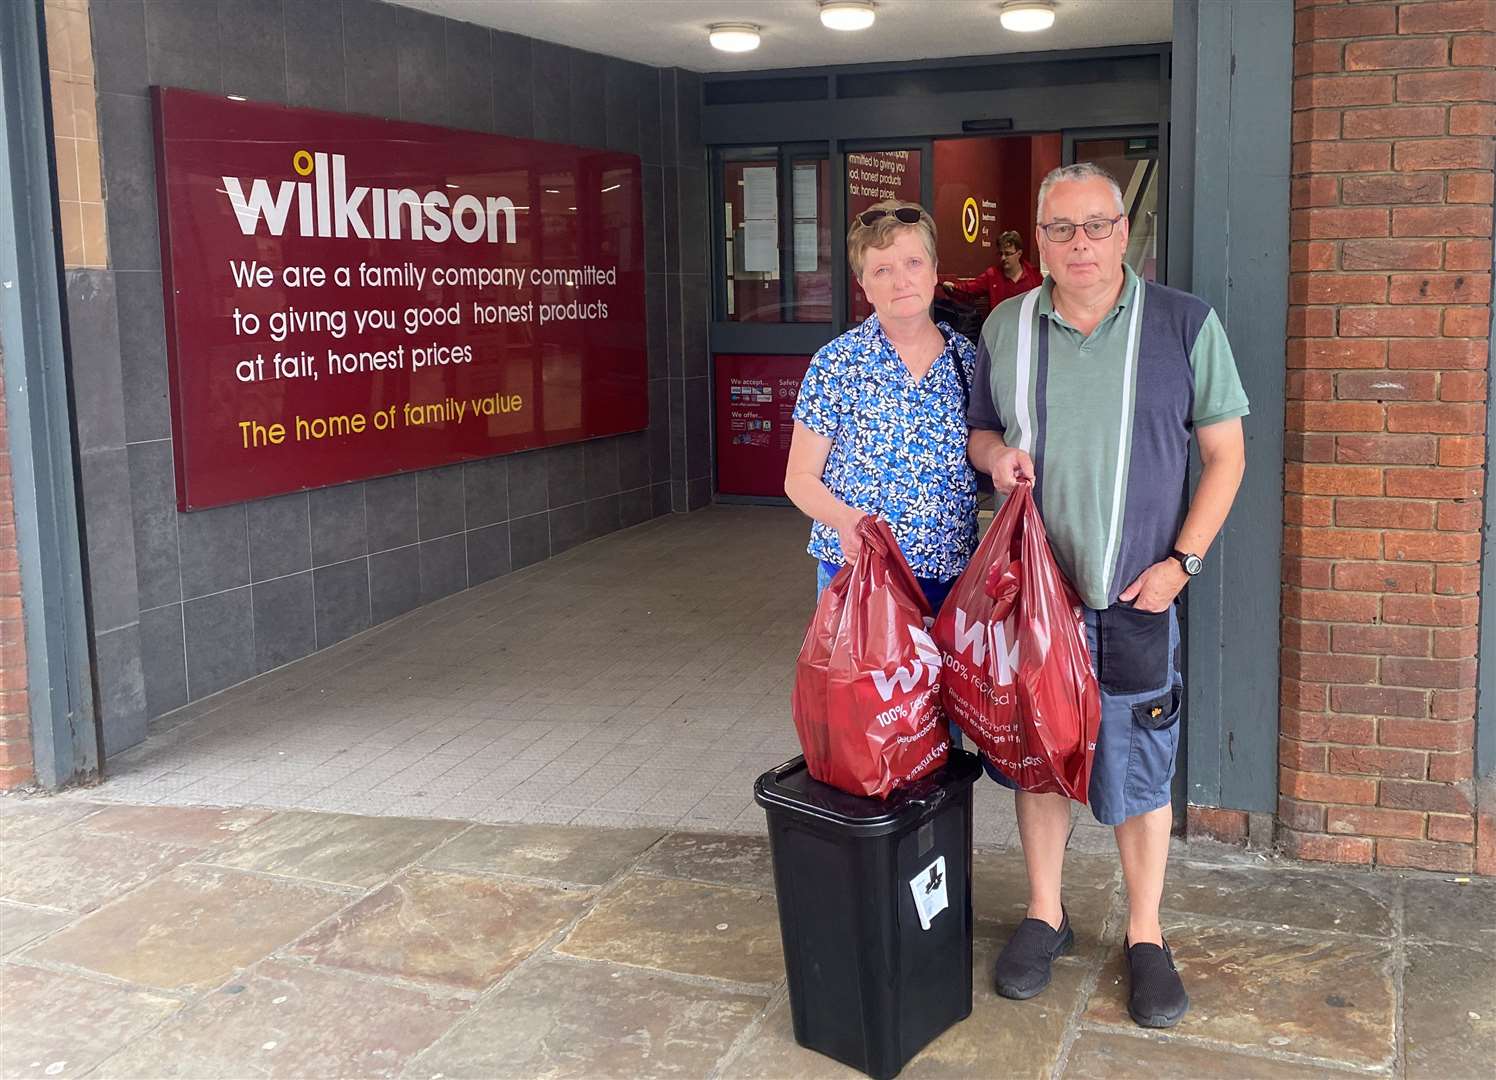 Mary and Adrian Fellow from River near Dover agreed there is no store quite like Wilko on the high street